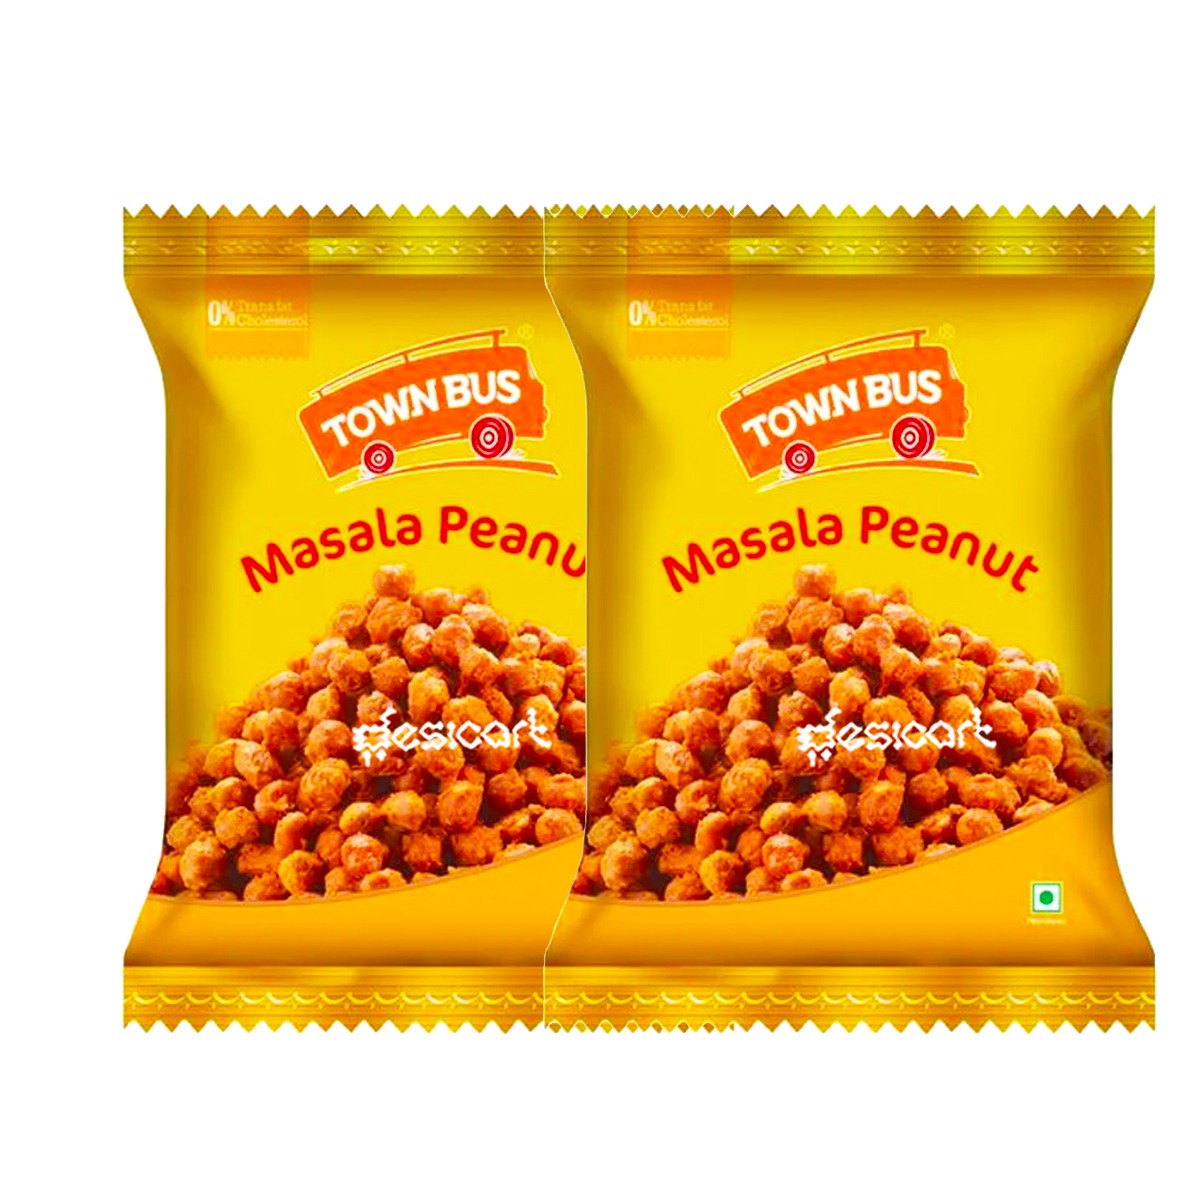 TOWN BUS MASALA PEANUT (PACK OF 2) 170G